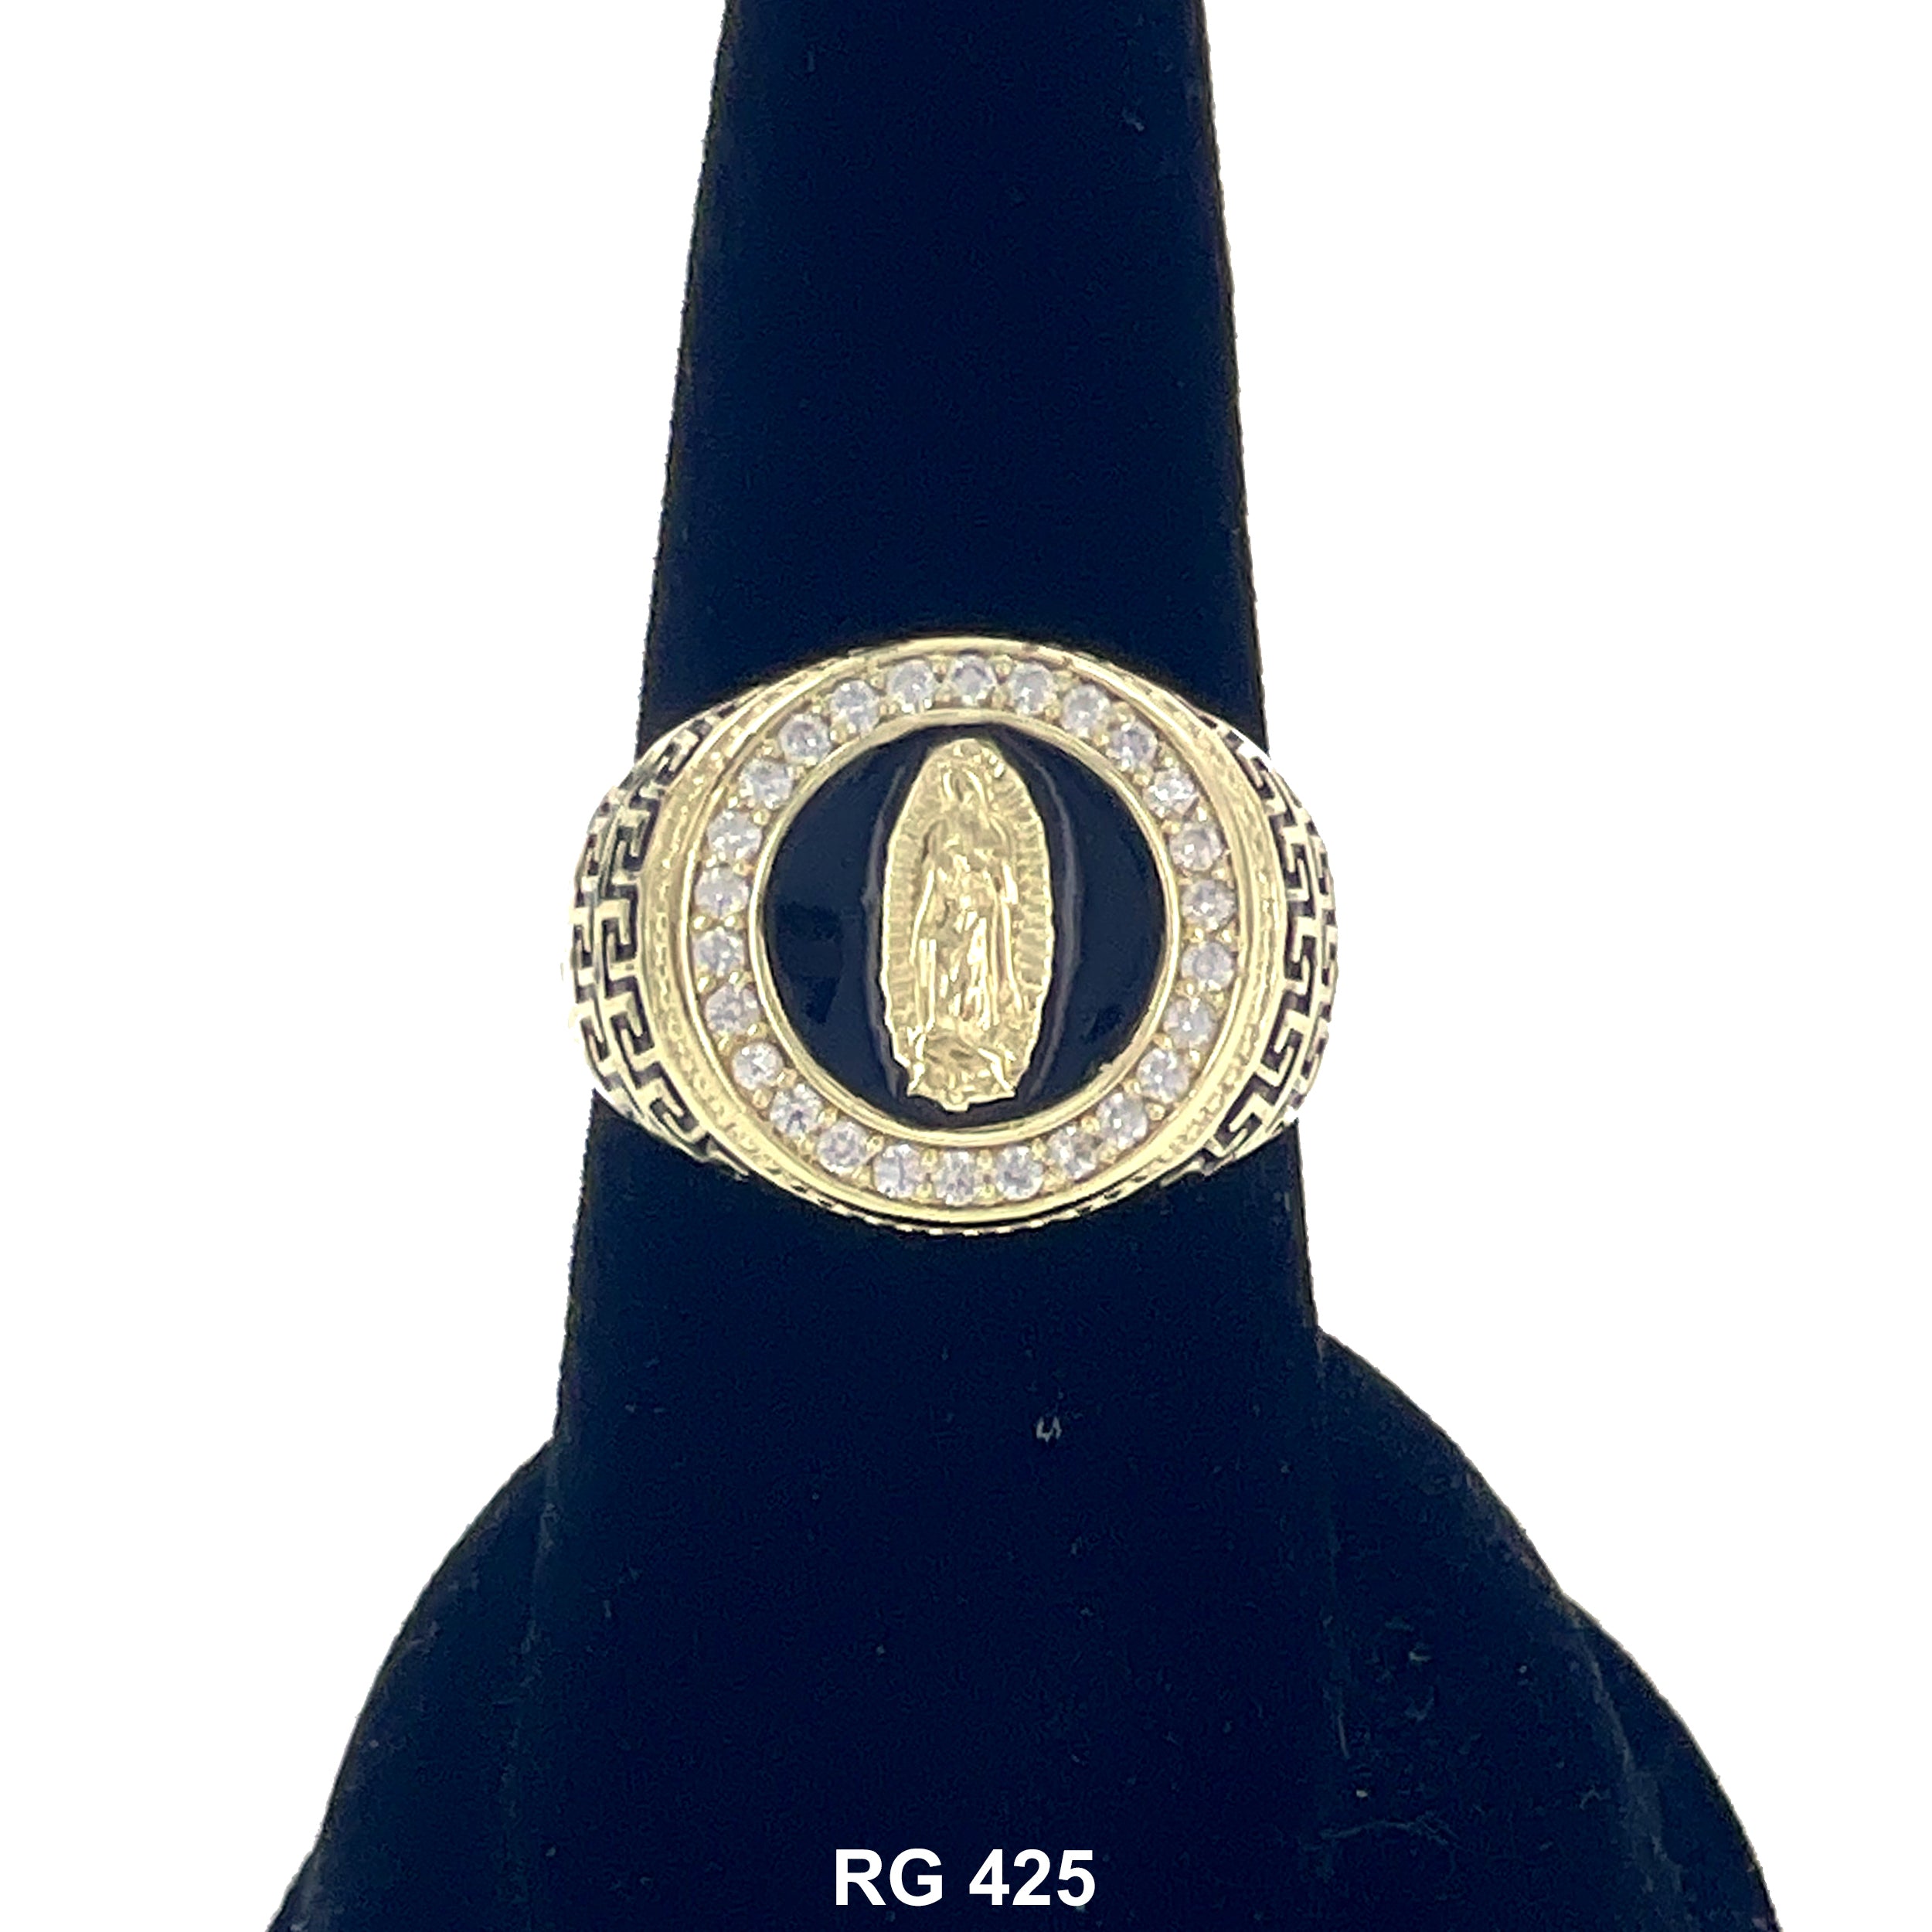 Guadalupe Openable Ring RG 425